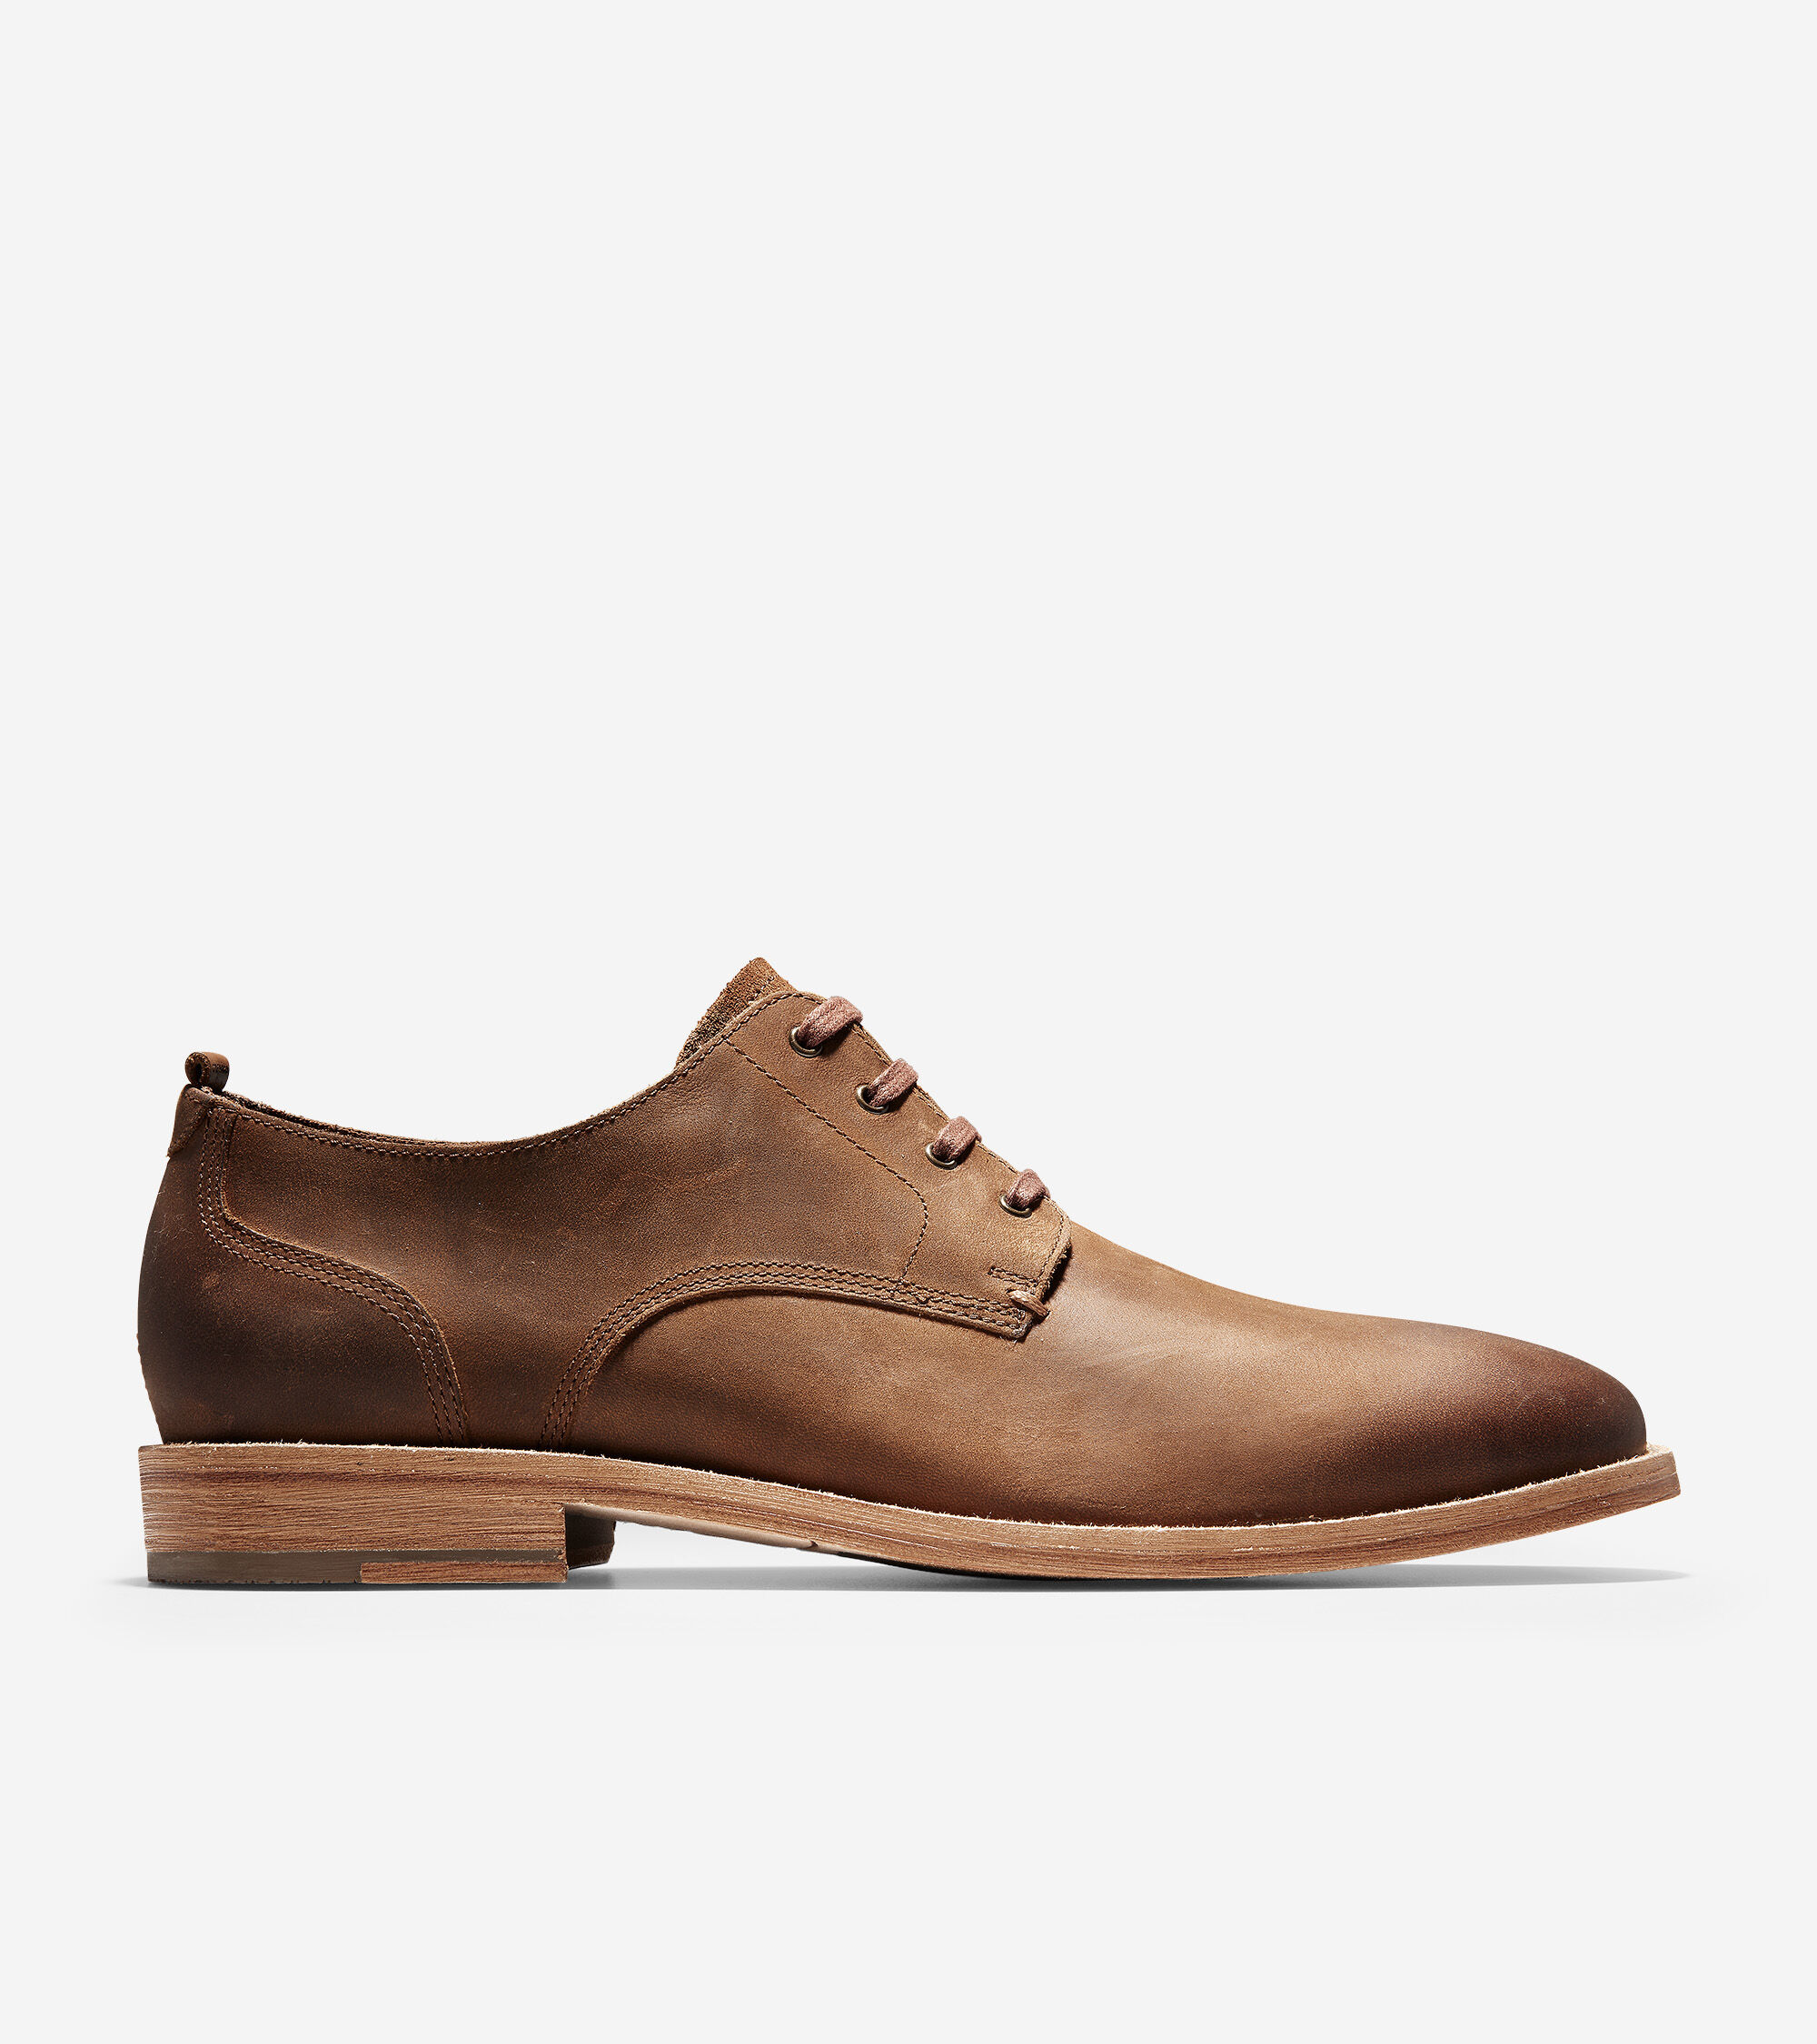 dress shoes running sole